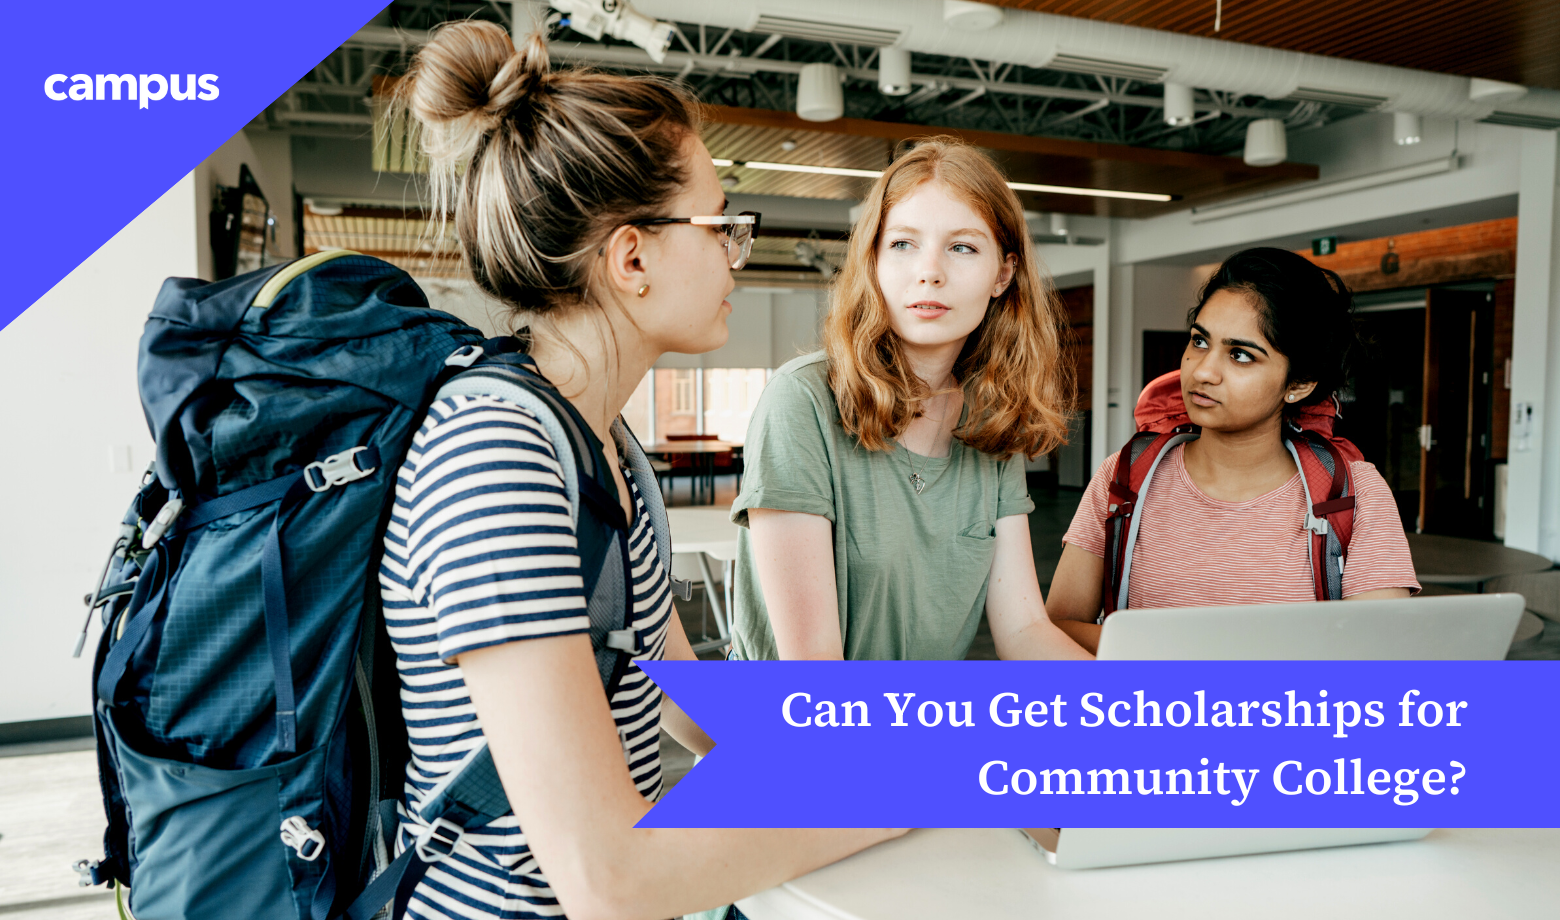 Can You Get Scholarships for Community College?